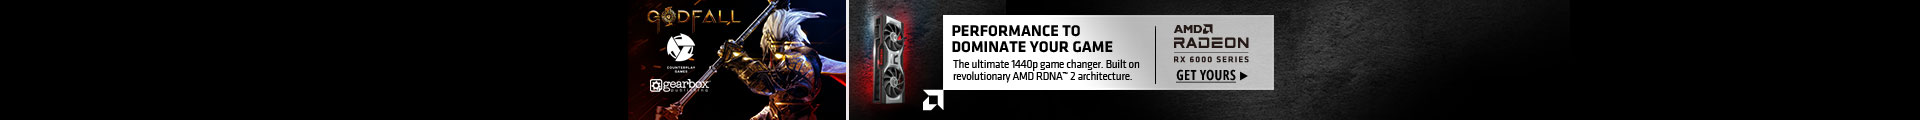 Performance to Dominate Your Game